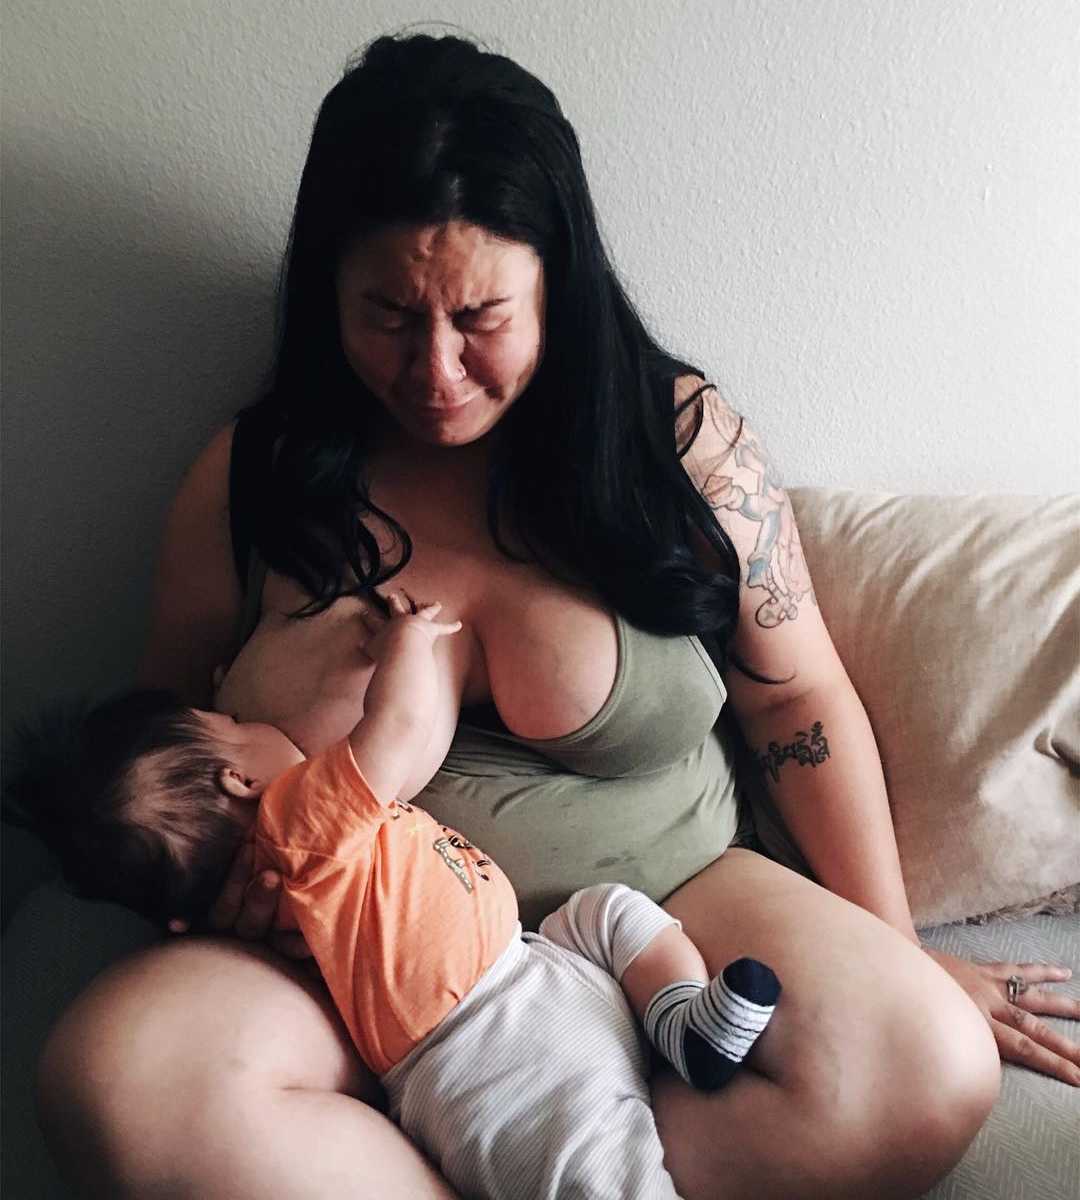 woman struggling with postpartum depression cries while breastfeeding baby